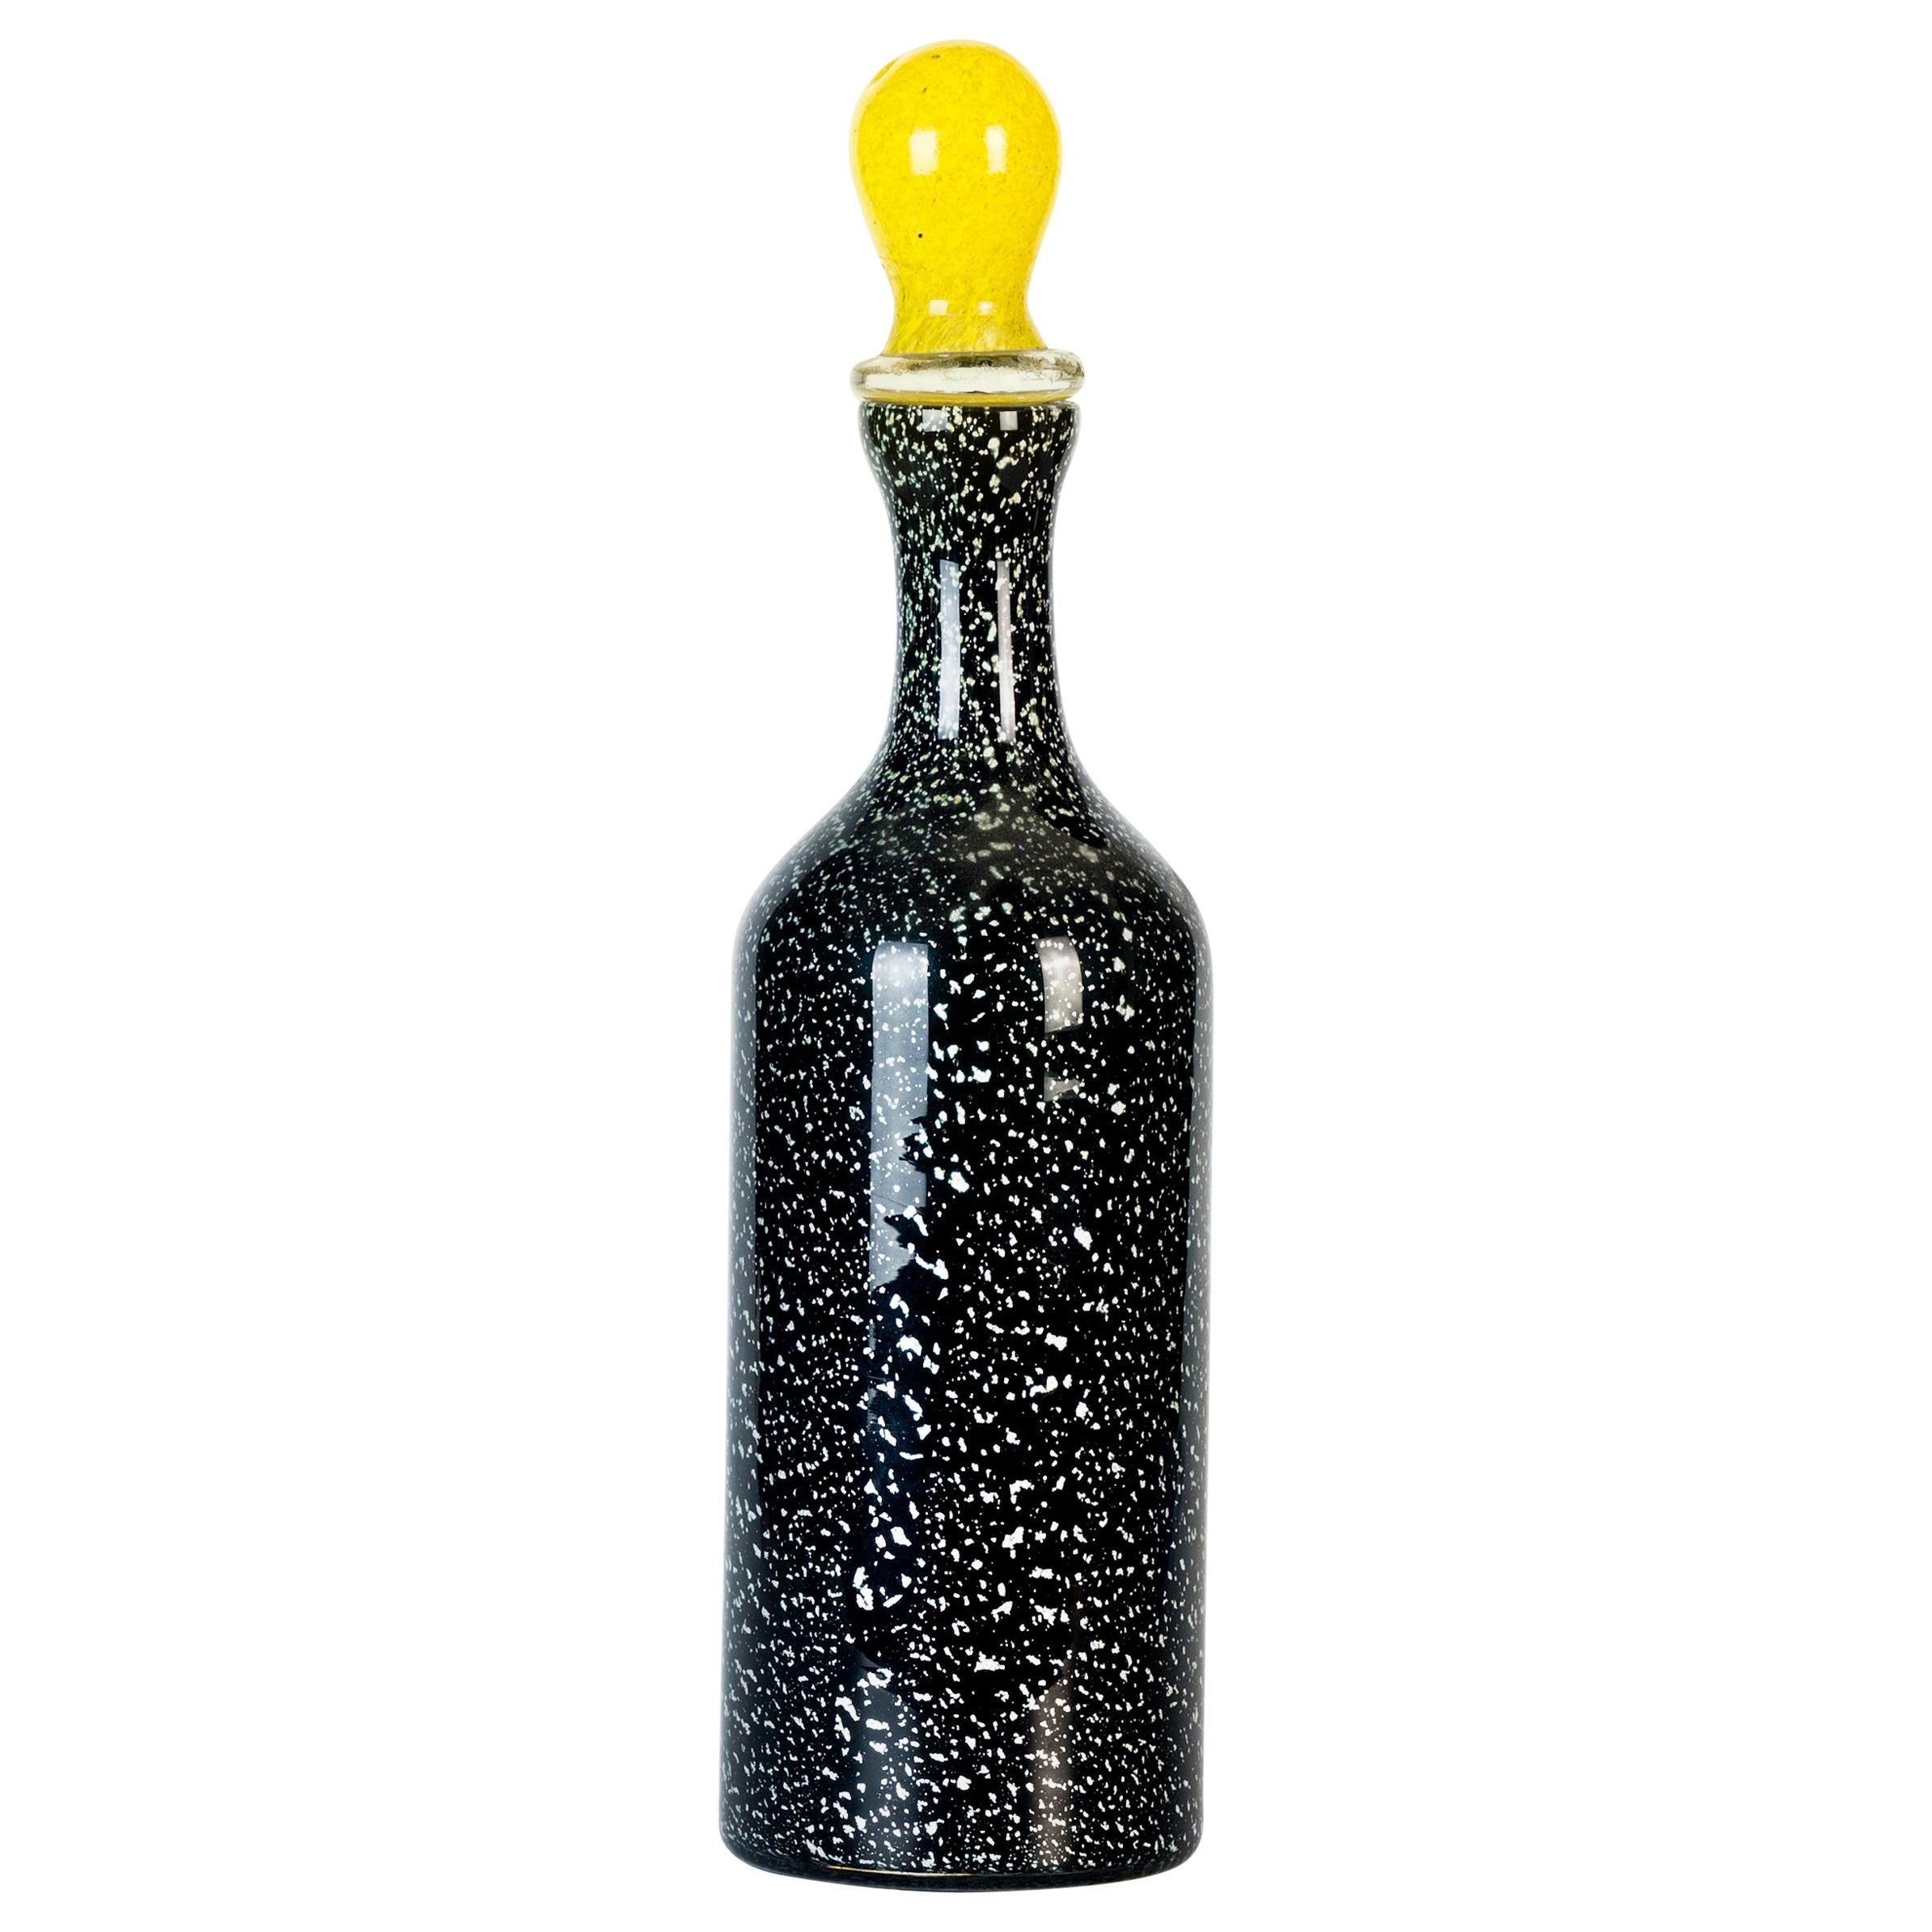 Vintage Black and White Spotted Bottle by Jean Mell Murano, Italy, 1970s